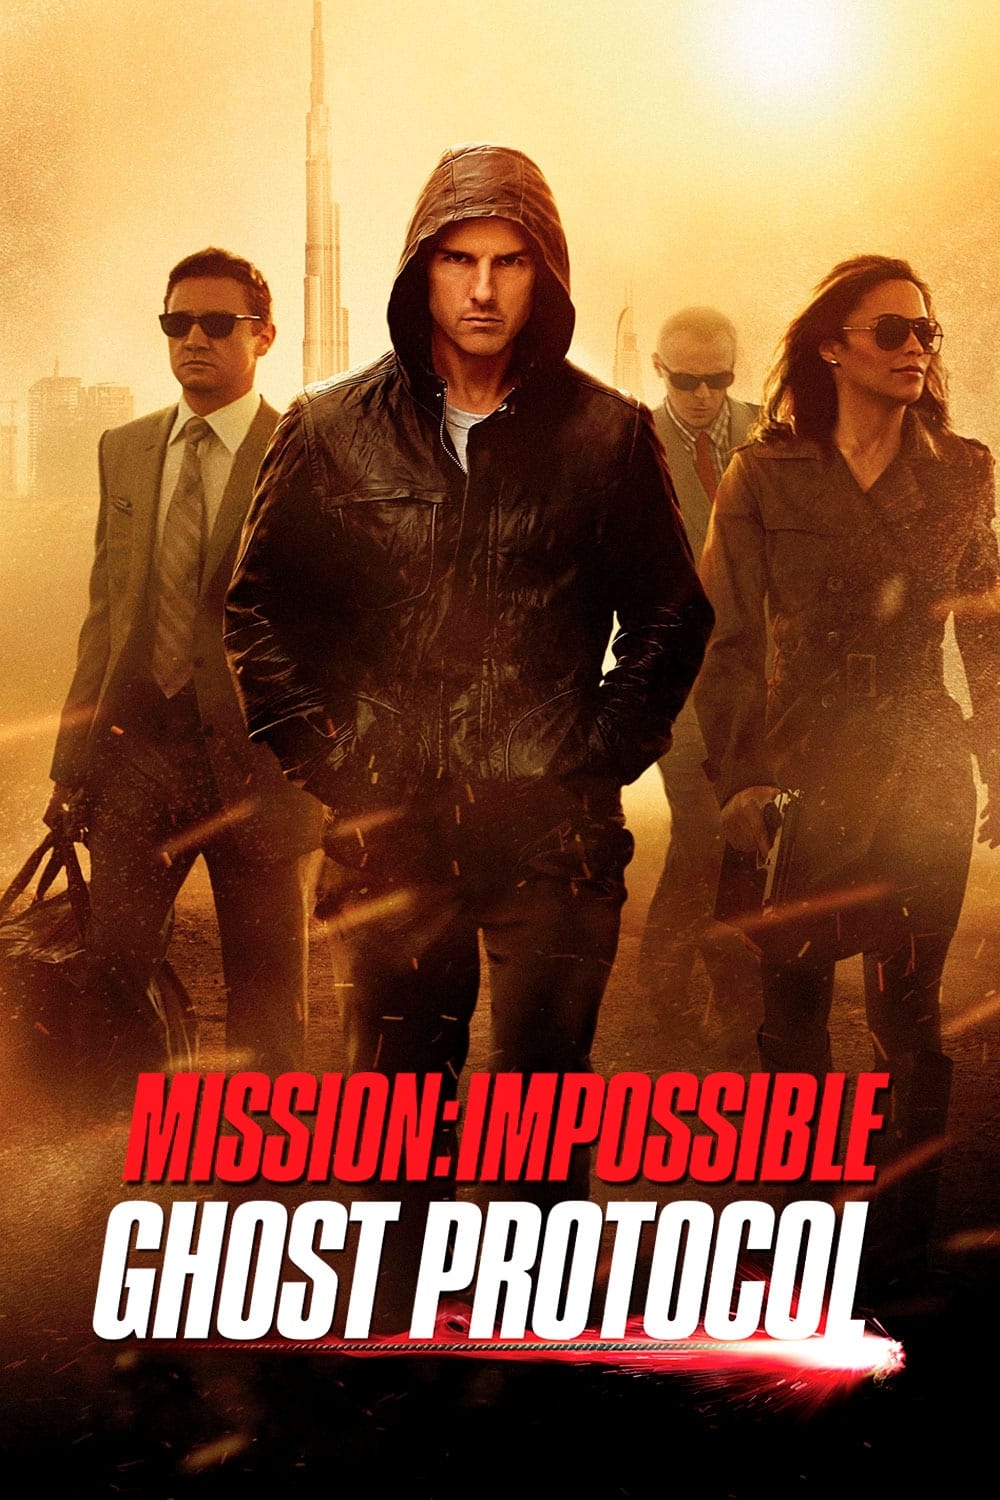 Mission Impossible 4 – Ghost Protocol (2011) Movie Download Hindi & English Dual Audio Bluray 480p 720p 1080p 2160p 4K 60Fps